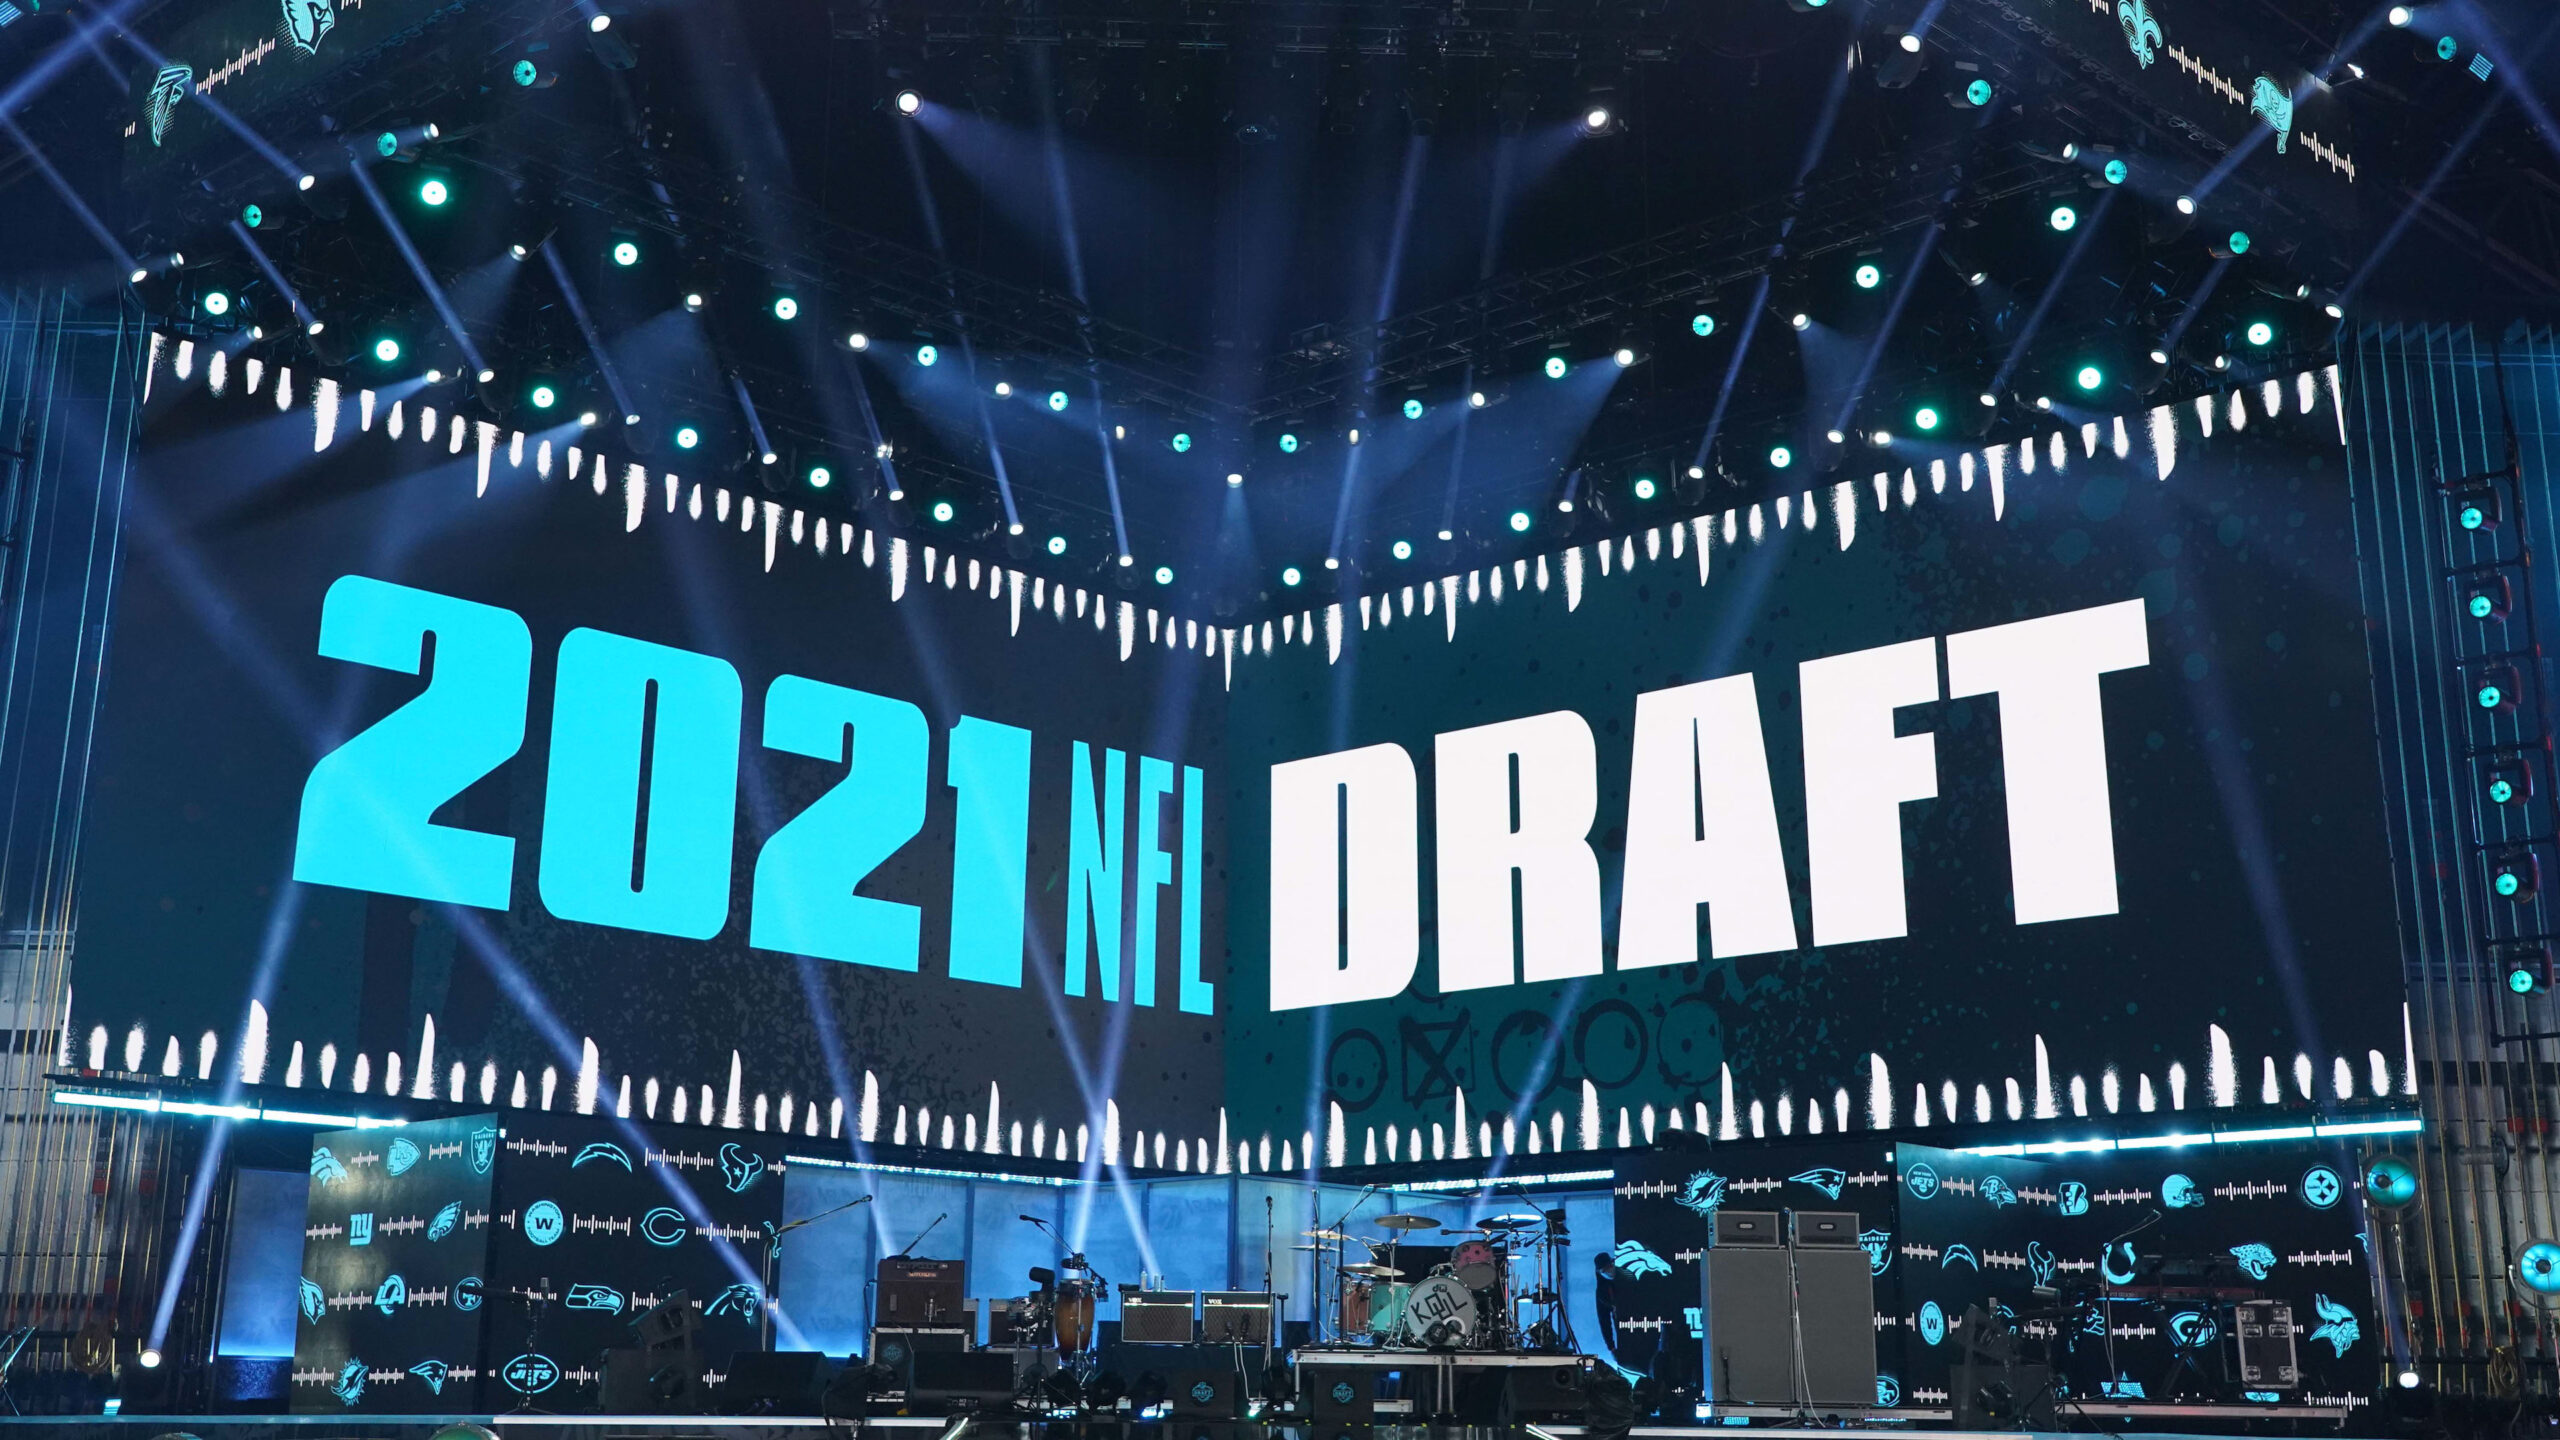 Ice Cube kicked out of the NFL Draft 2022 in Las Vegas